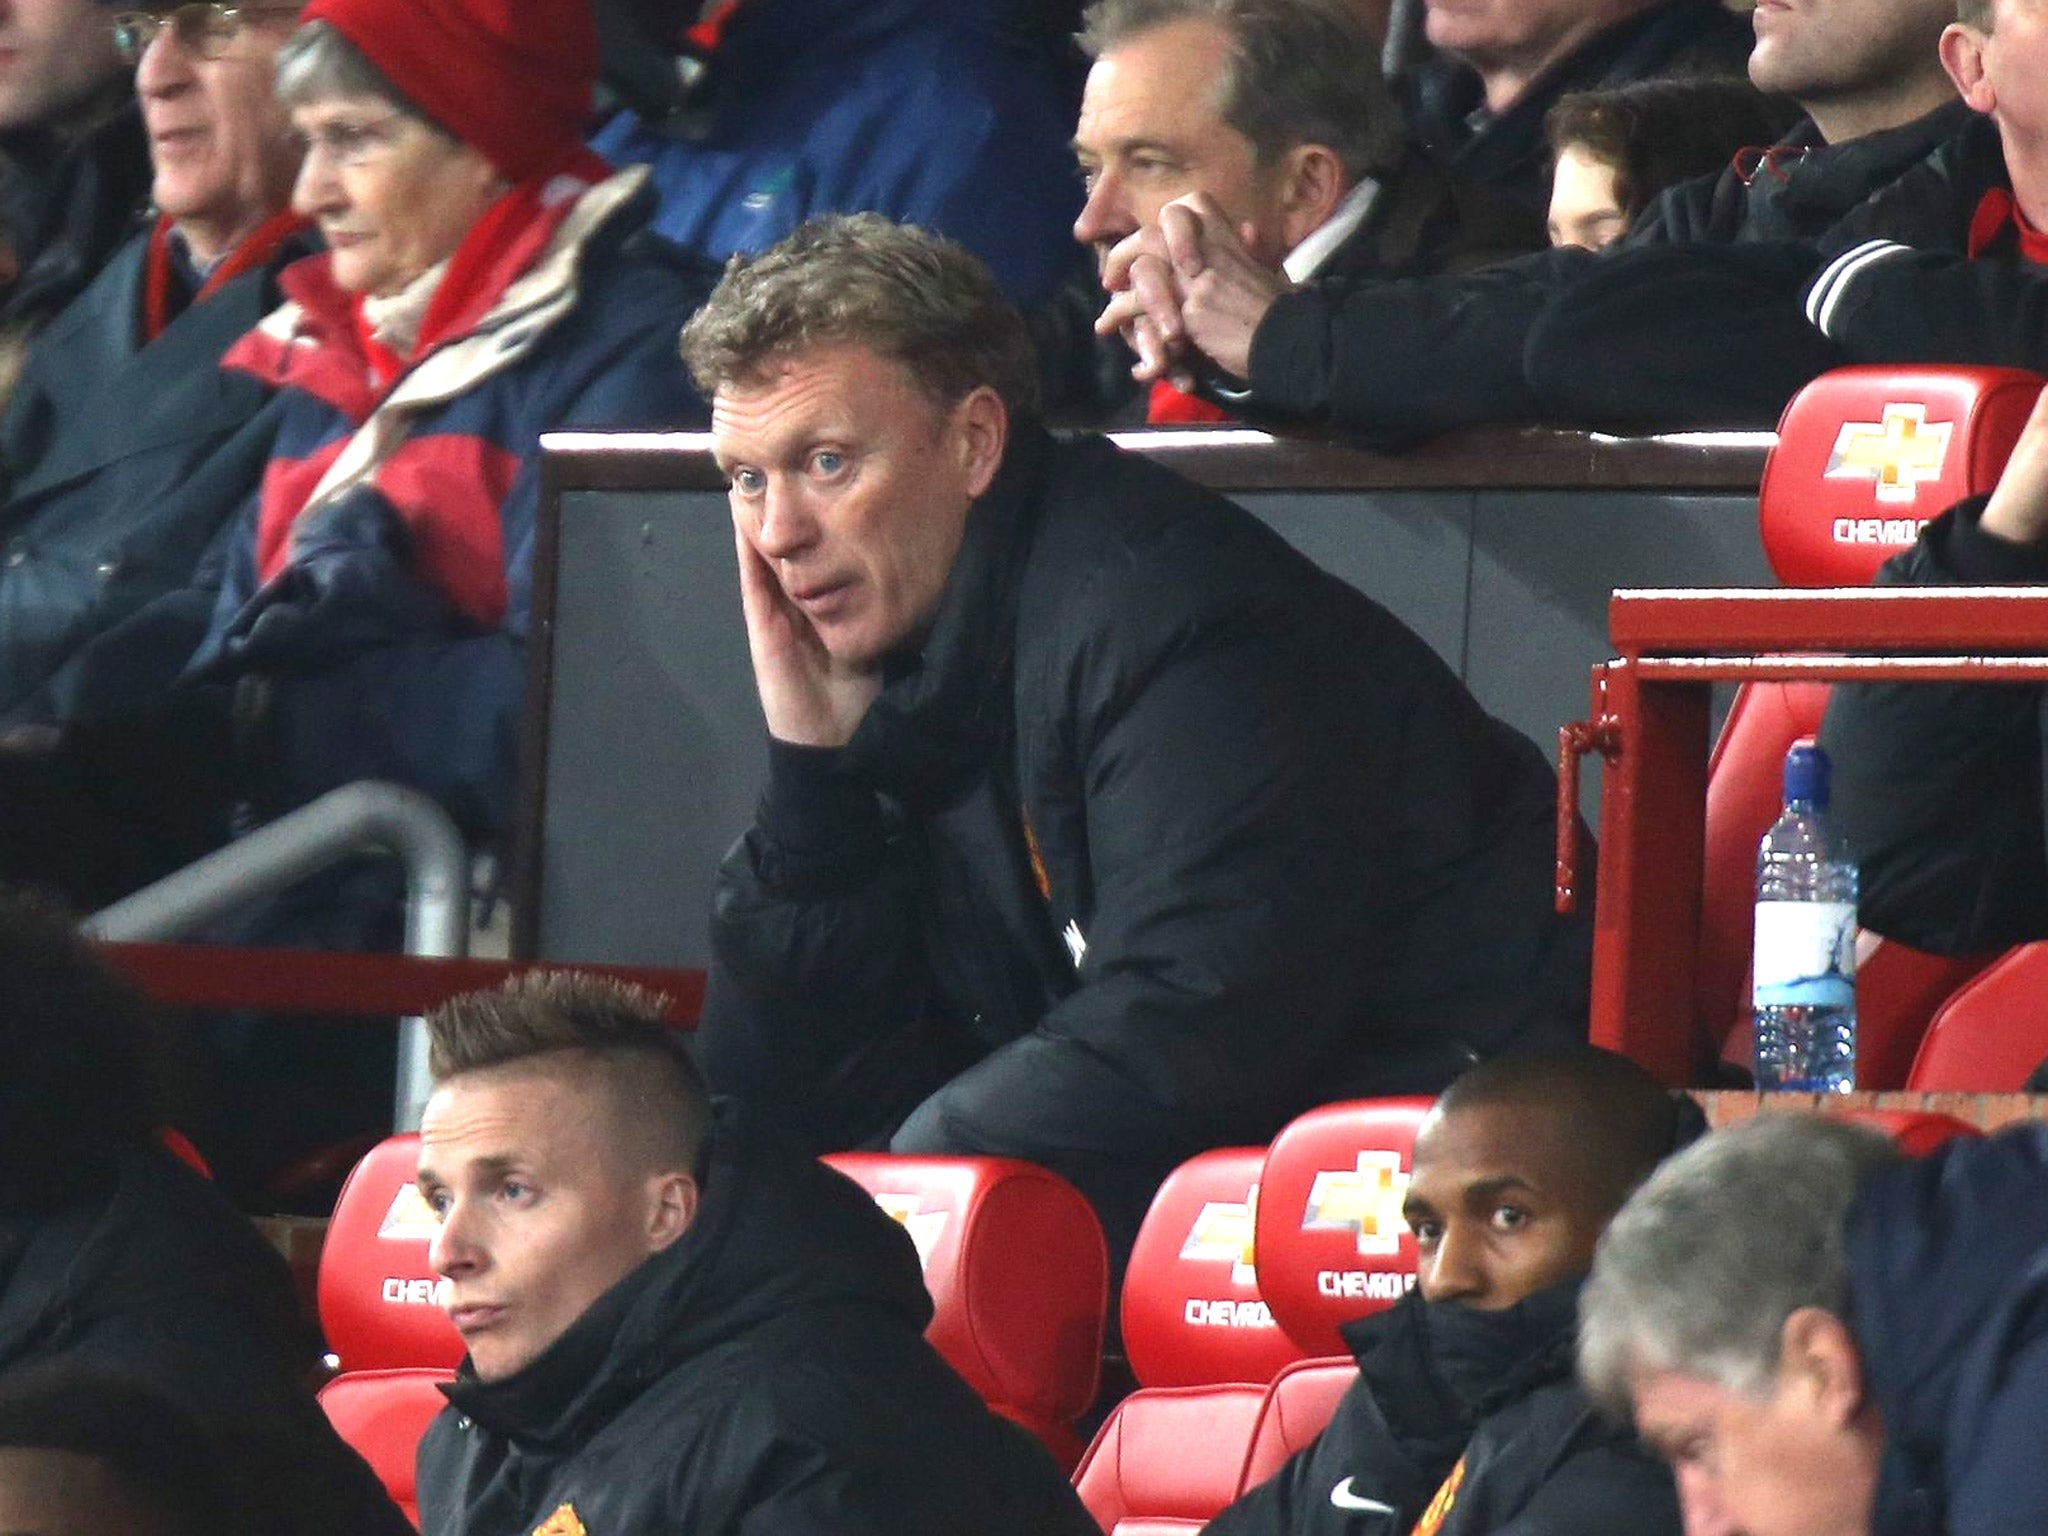 Manchester United will continue to support their beleaguered manager